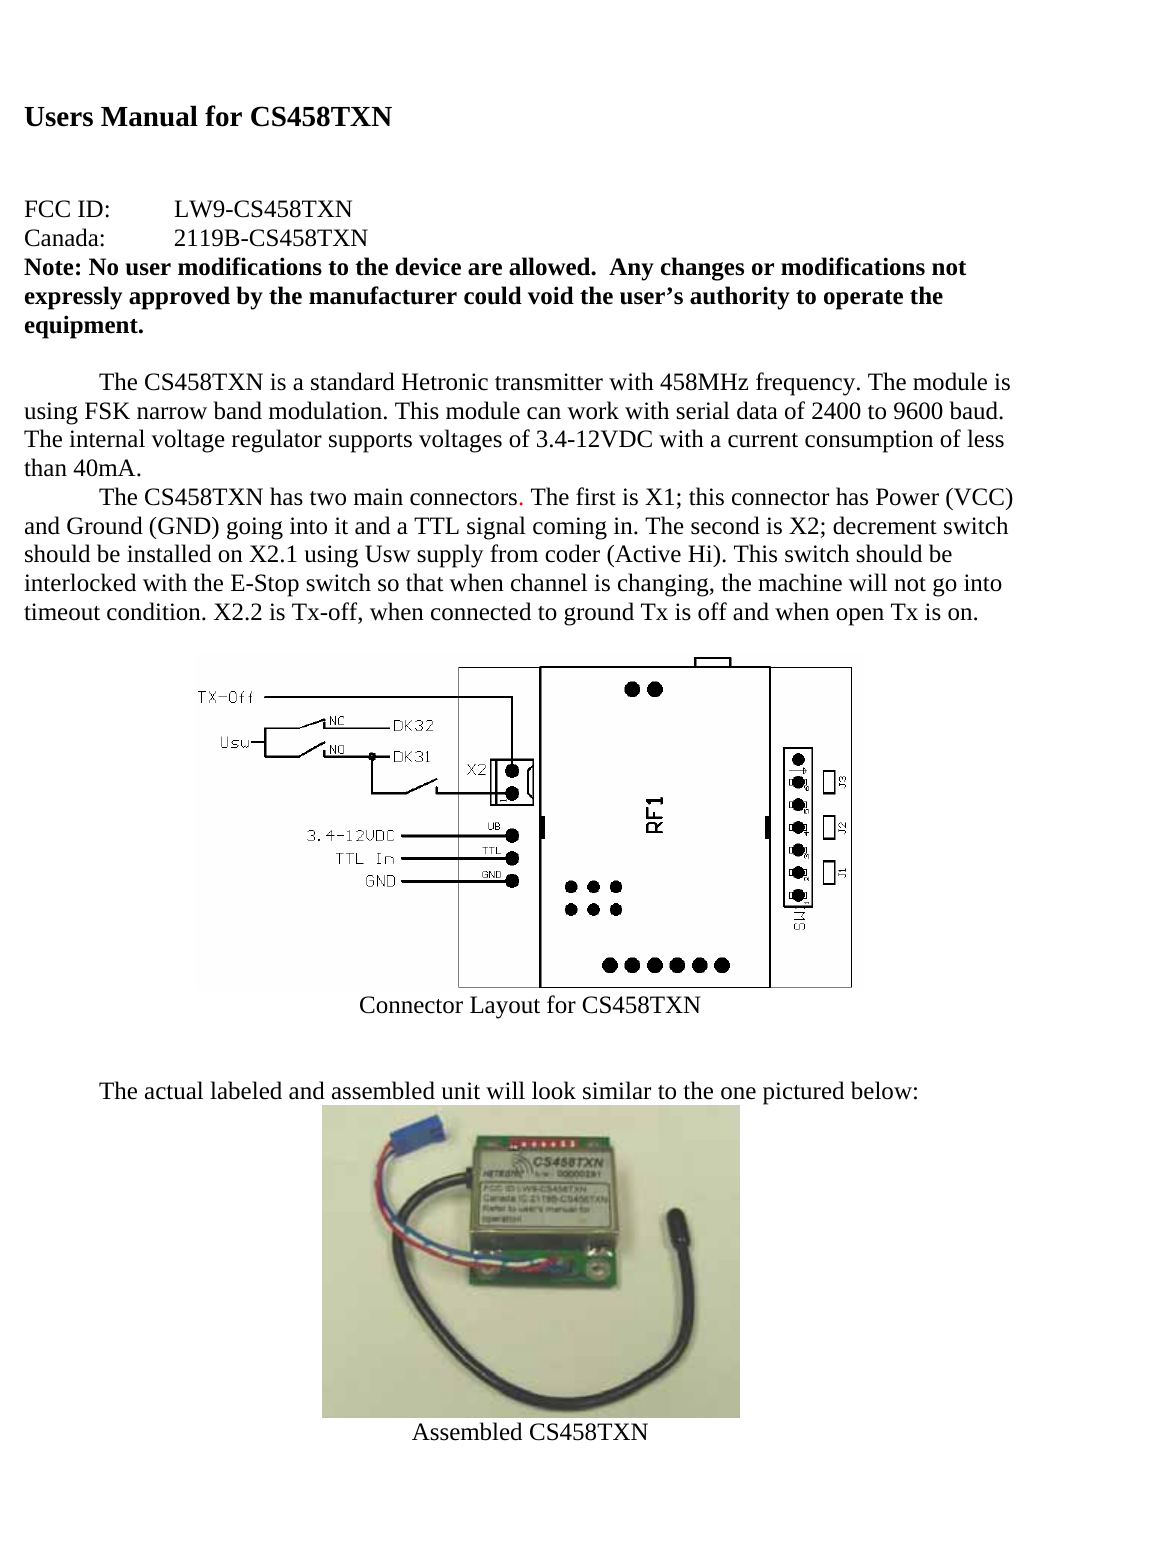 Users Manual for CS458TXN   FCC ID:  LW9-CS458TXN Canada:   2119B-CS458TXN Note: No user modifications to the device are allowed.  Any changes or modifications not expressly approved by the manufacturer could void the user’s authority to operate the equipment.  The CS458TXN is a standard Hetronic transmitter with 458MHz frequency. The module is using FSK narrow band modulation. This module can work with serial data of 2400 to 9600 baud. The internal voltage regulator supports voltages of 3.4-12VDC with a current consumption of less than 40mA.   The CS458TXN has two main connectors. The first is X1; this connector has Power (VCC) and Ground (GND) going into it and a TTL signal coming in. The second is X2; decrement switch should be installed on X2.1 using Usw supply from coder (Active Hi). This switch should be interlocked with the E-Stop switch so that when channel is changing, the machine will not go into timeout condition. X2.2 is Tx-off, when connected to ground Tx is off and when open Tx is on.   Connector Layout for CS458TXN    The actual labeled and assembled unit will look similar to the one pictured below:  Assembled CS458TXN 